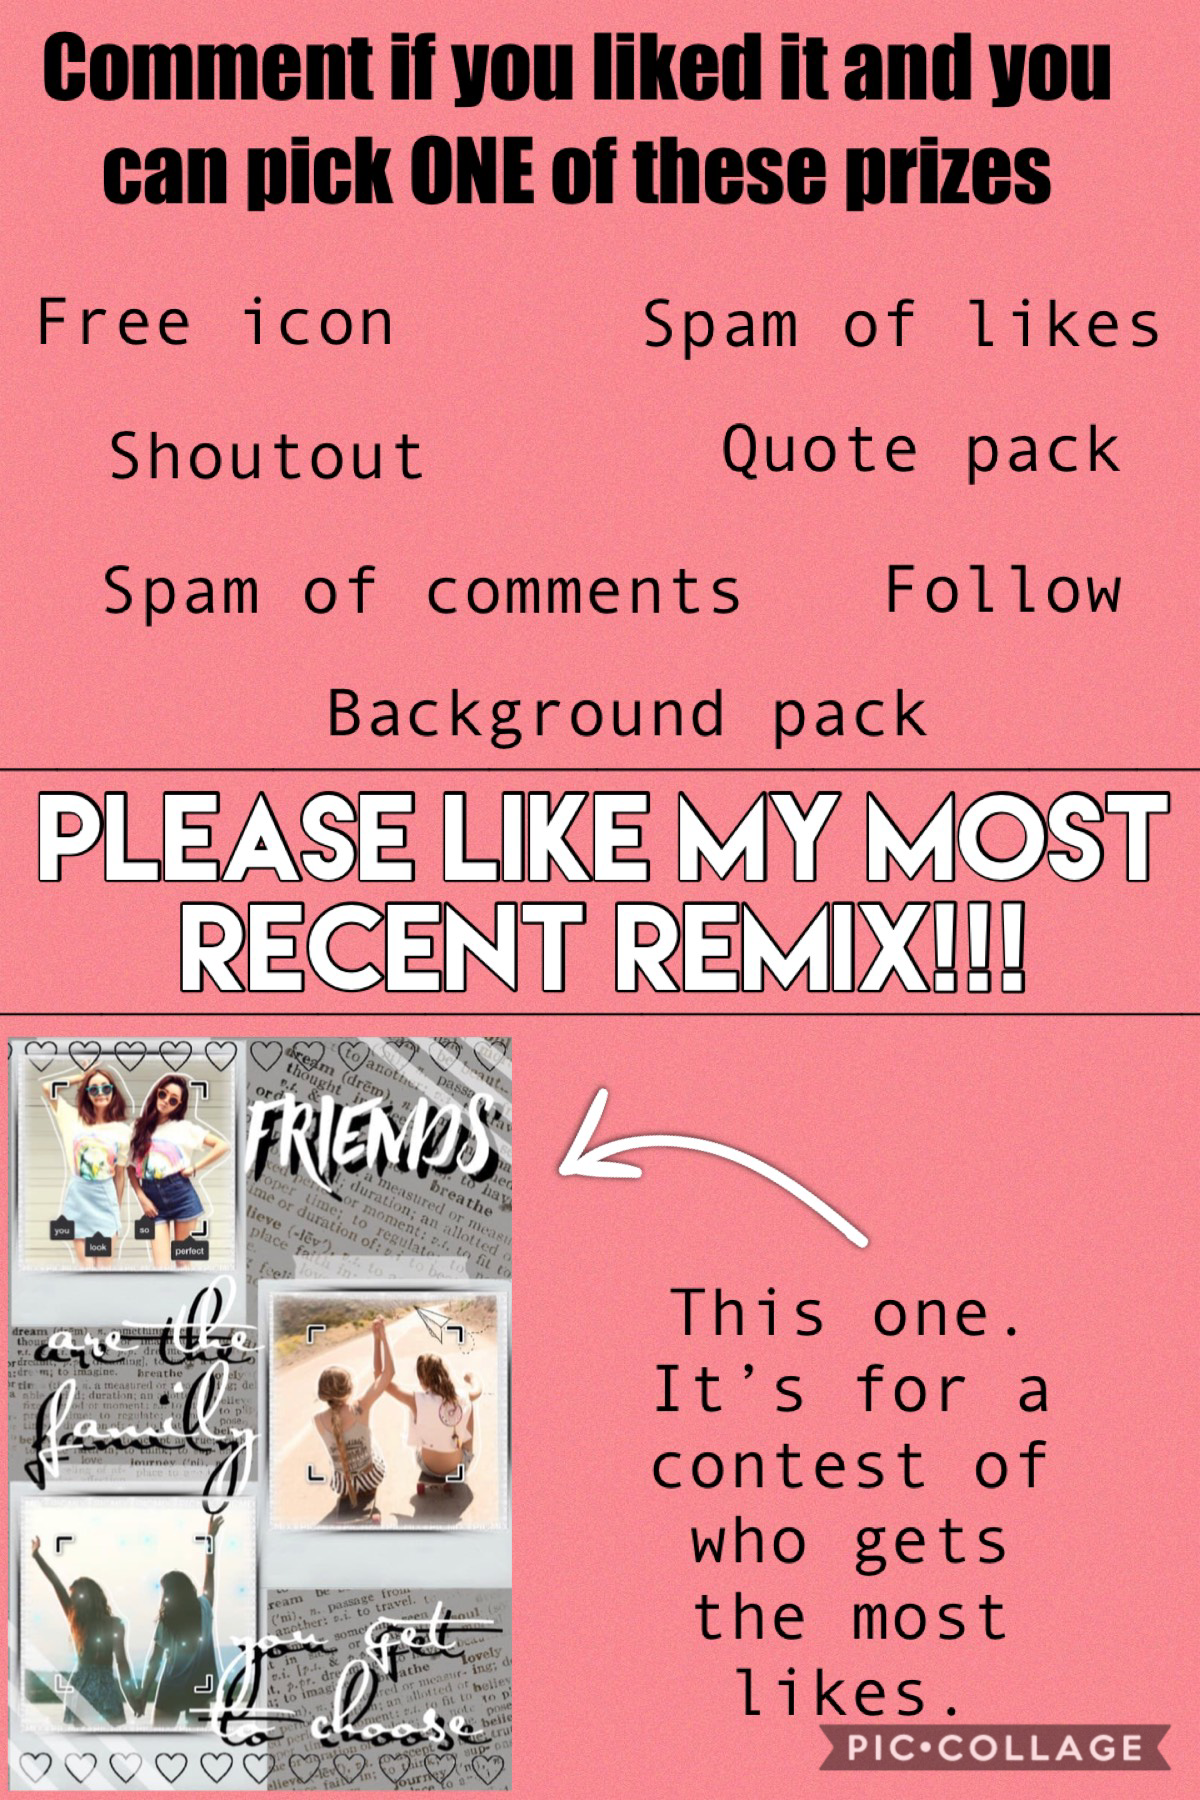 ❤️Tap❤️

Please like it! You can pick any one of the prizes if you do ❤️❤️❤️ 